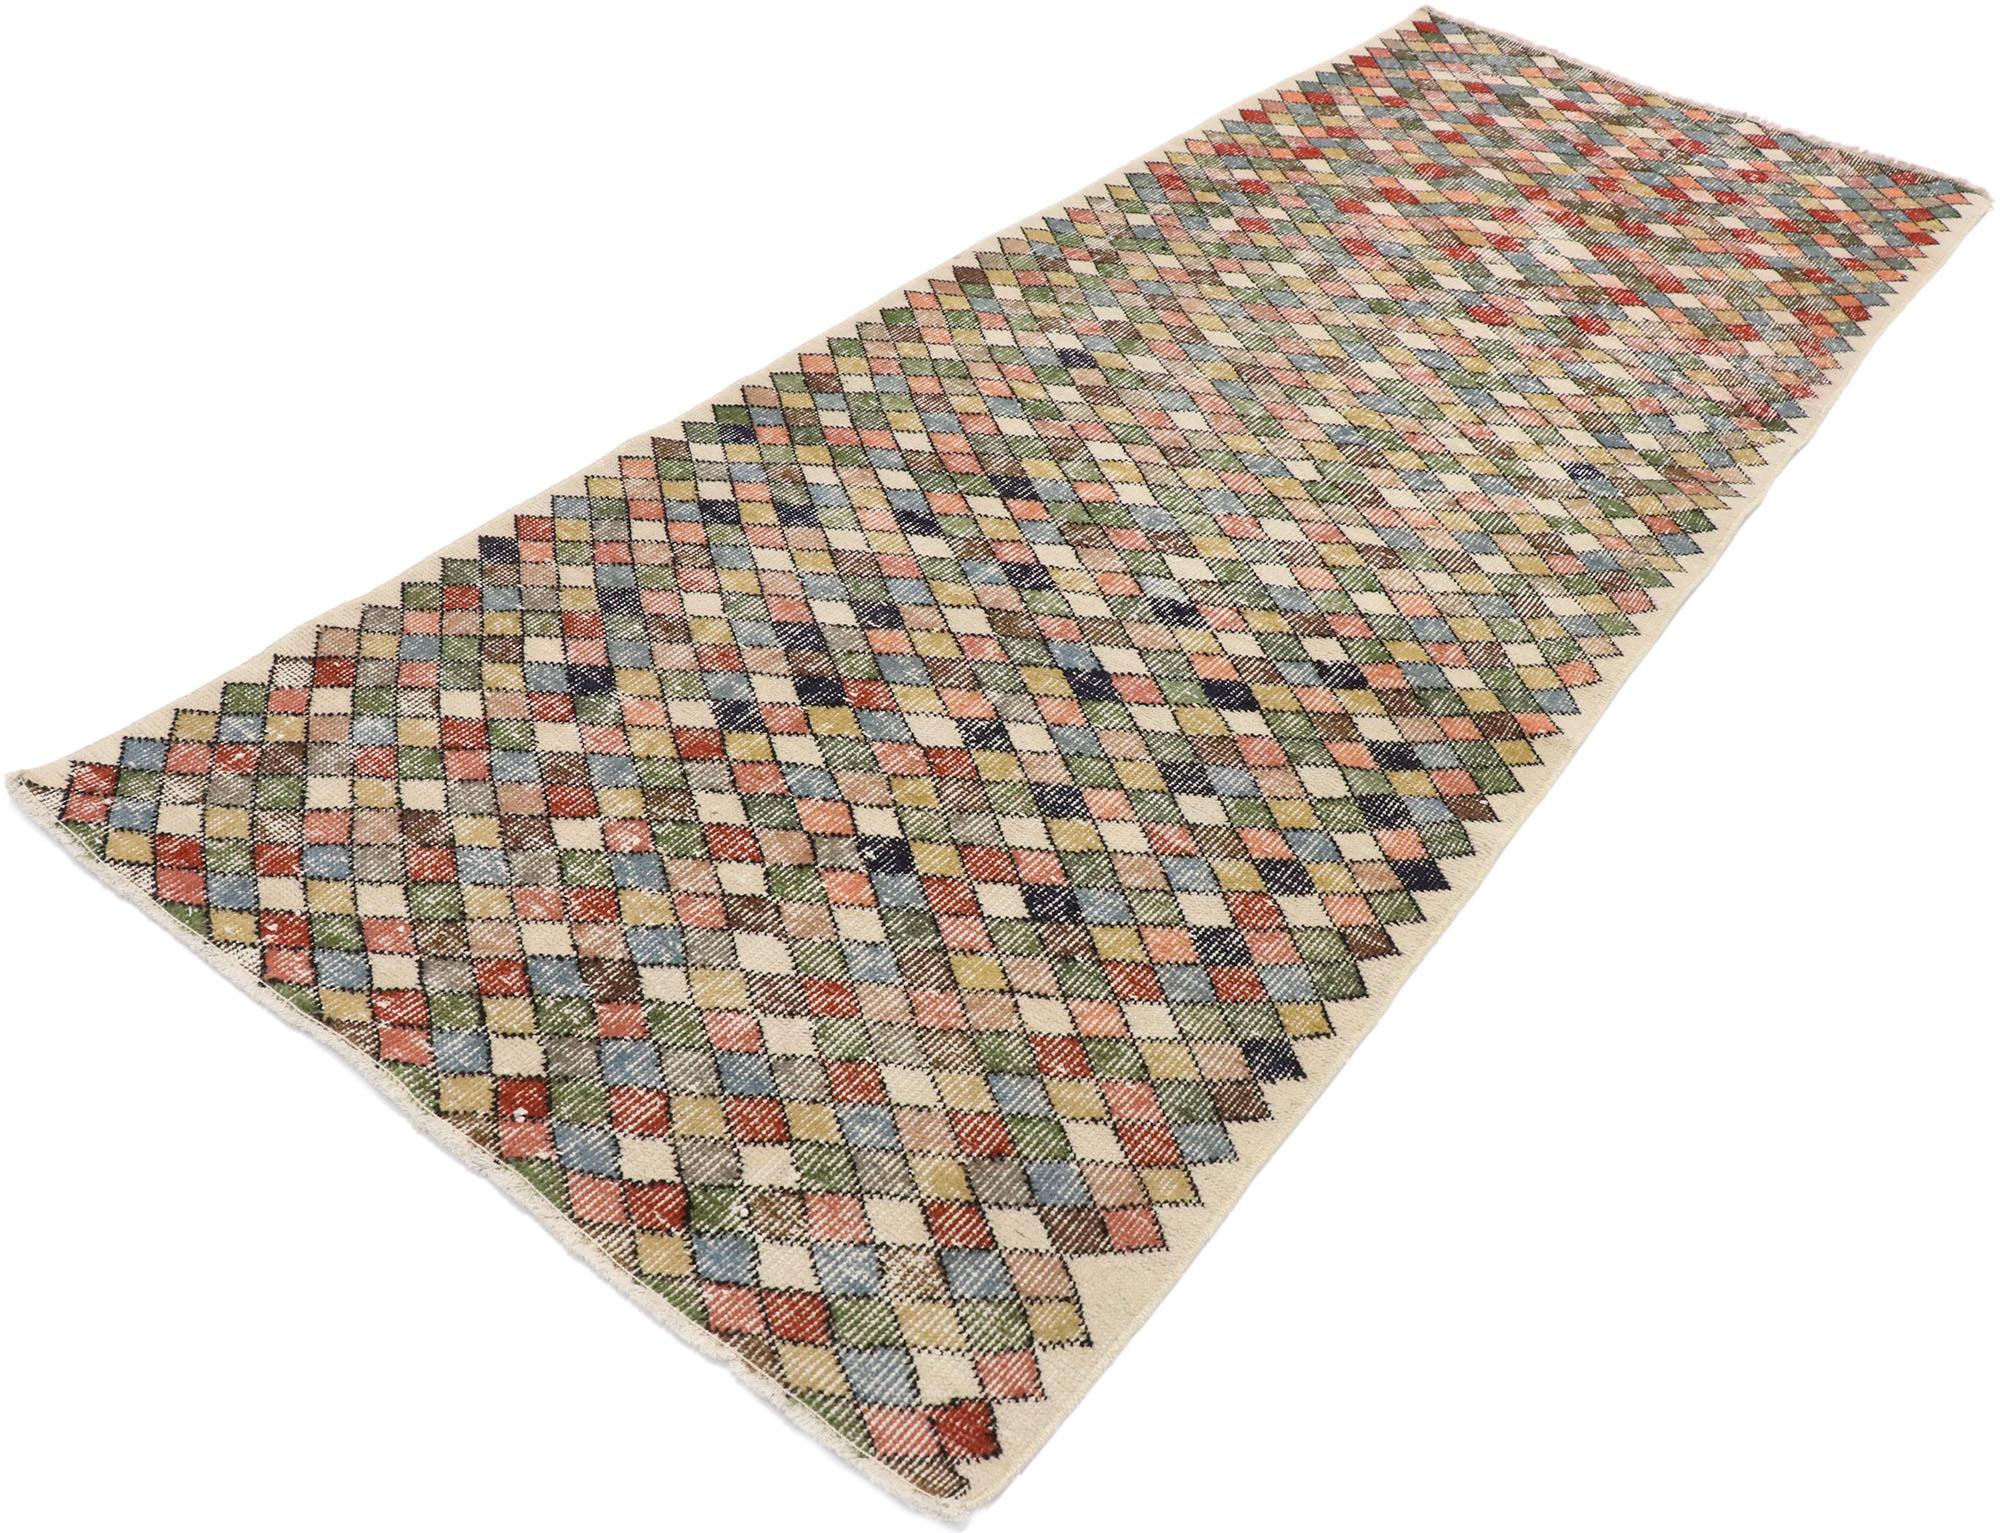 53302, distressed vintage Turkish Sivas rug with Rustic Cubist style. This hand knotted wool distressed vintage Turkish Sivas rug features an all-over checkered pattern comprised of multi-colored diamonds. Gentle waves of abrash and variations in